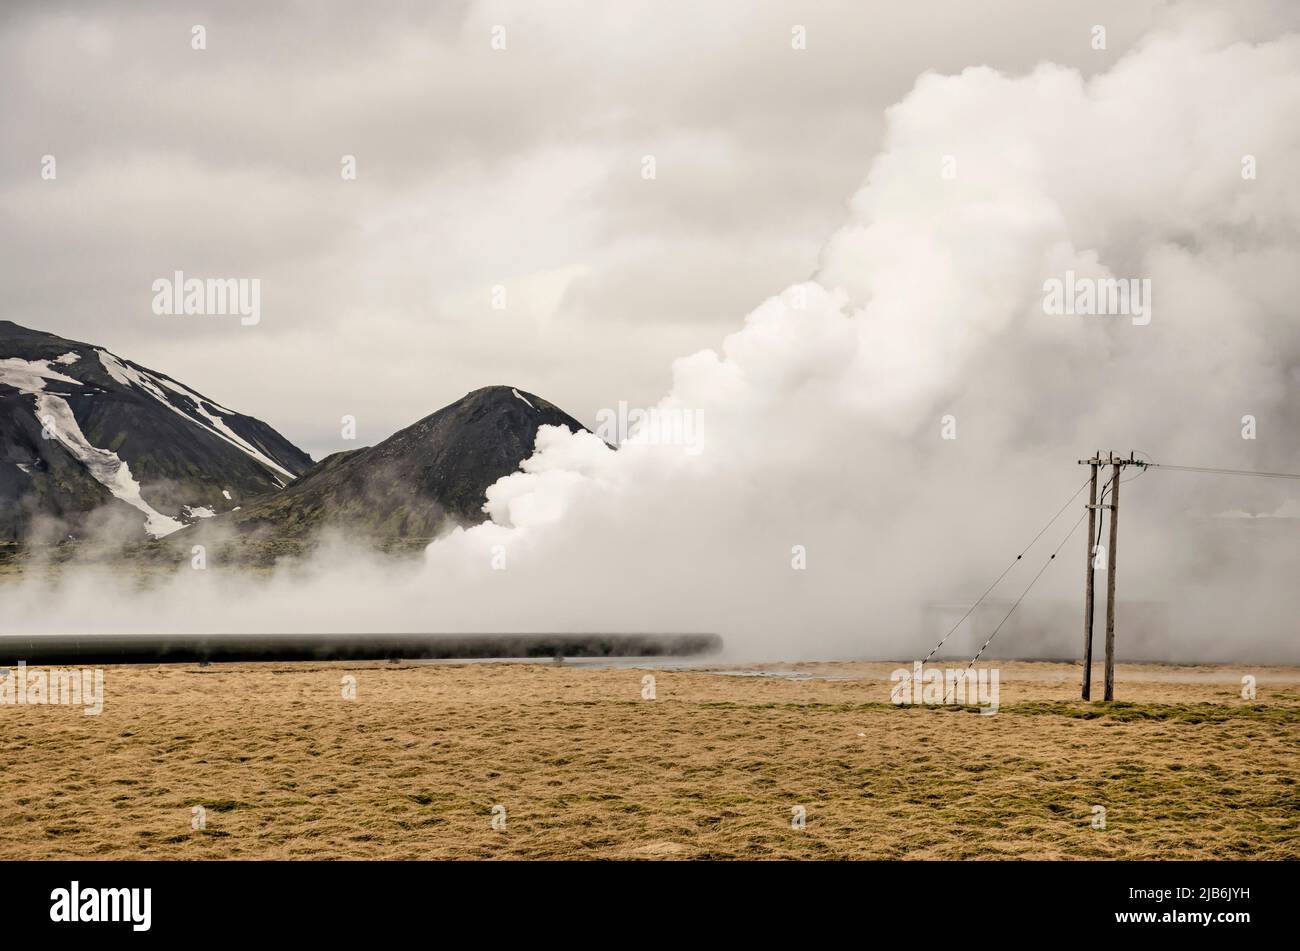 Hengill, Iceland, April 22, 2022: hot steam coming out of the ground in a grassy landscape with power lines near the Hellisheiði geothermal power plan Stock Photo